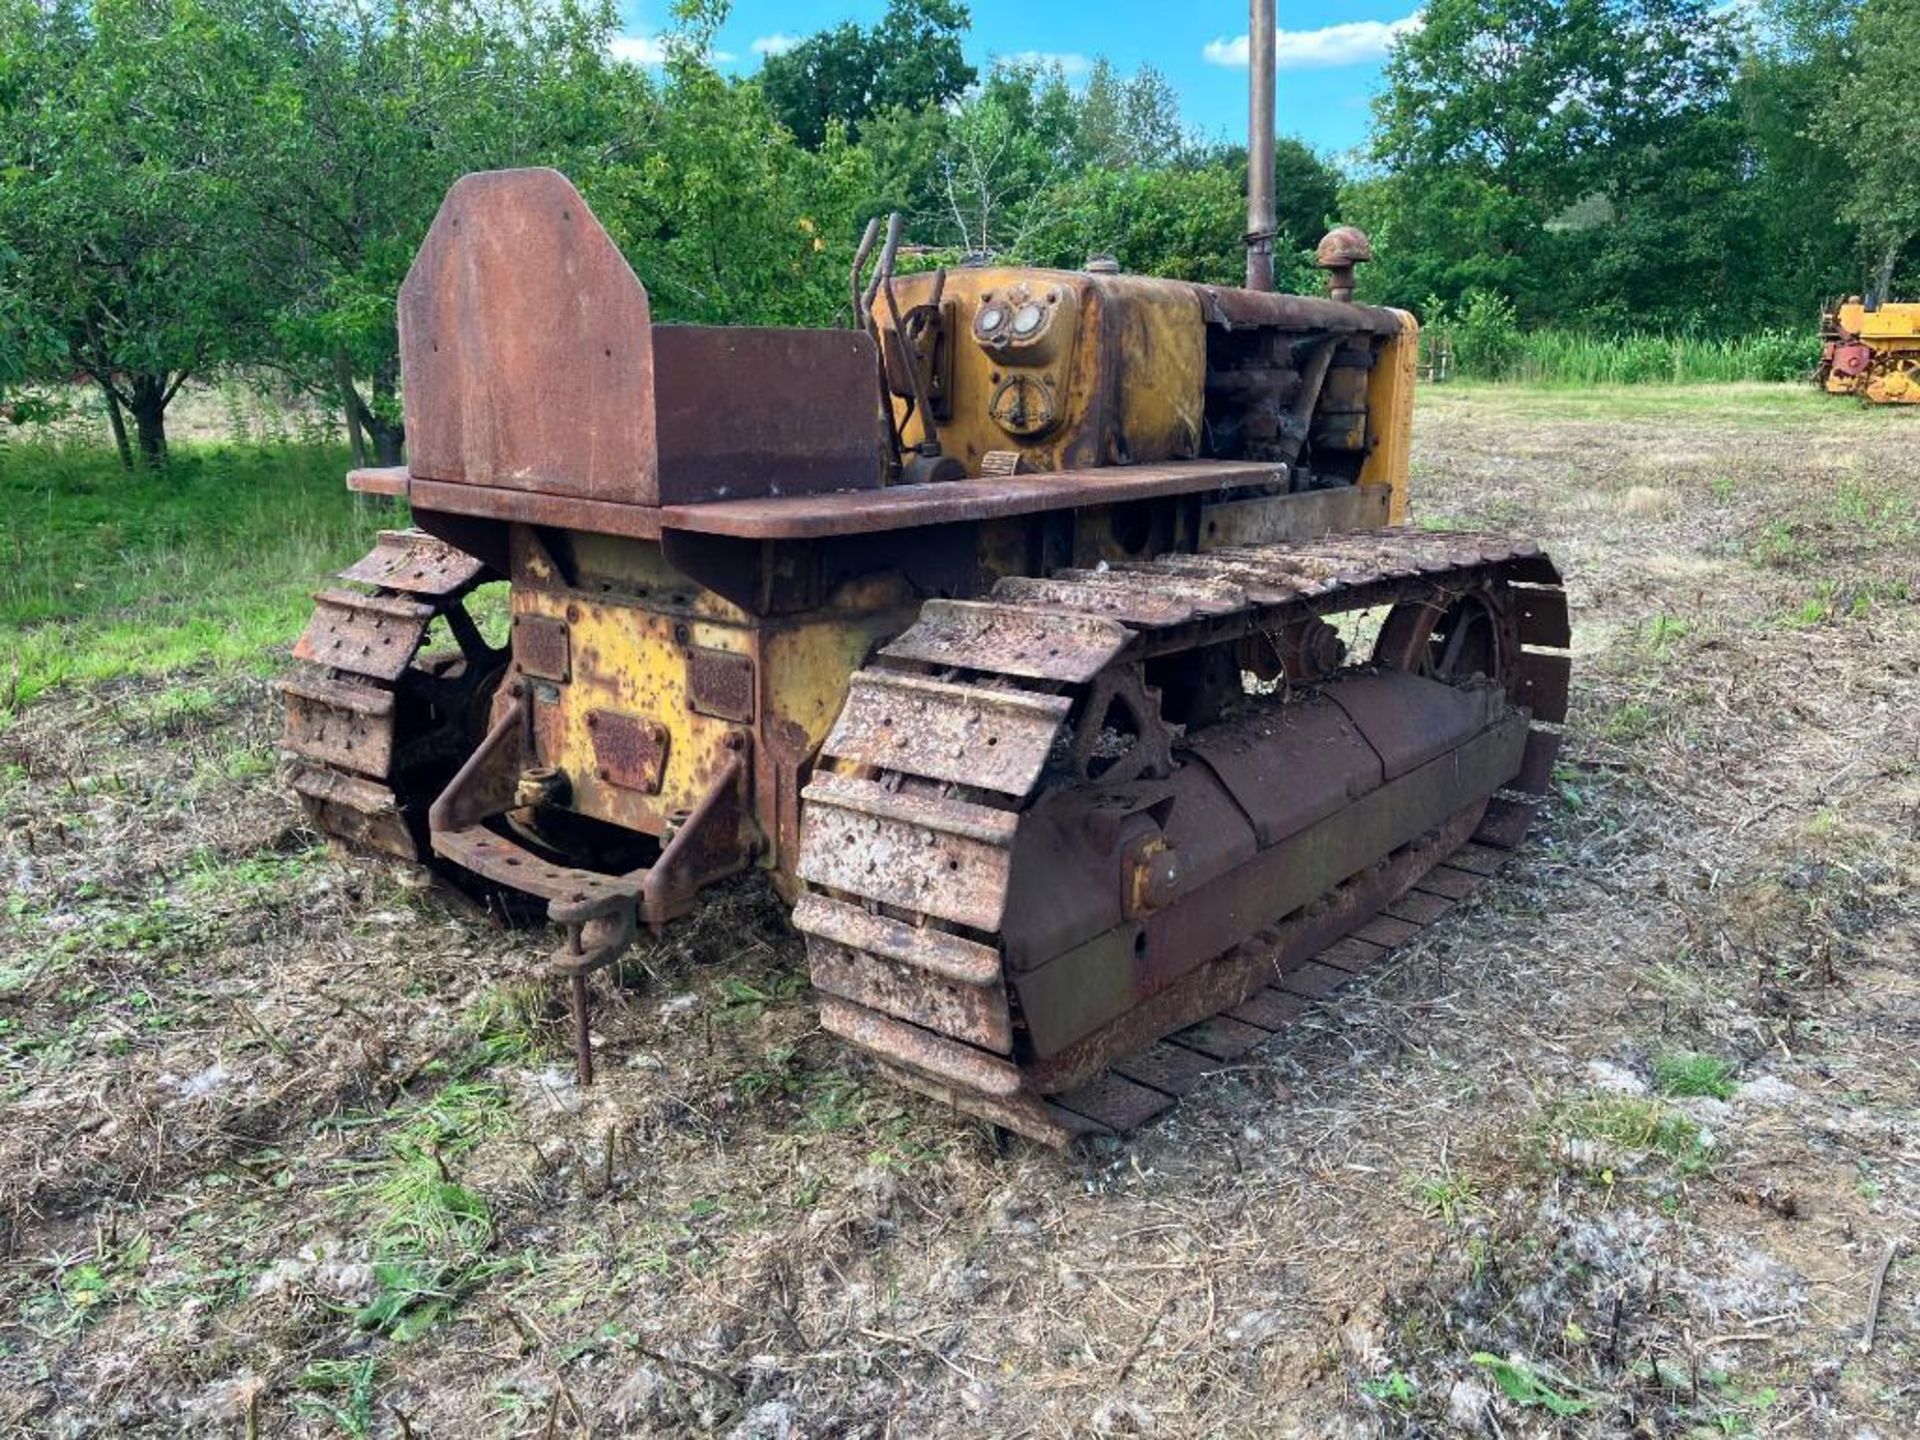 1939 Caterpillar R4 metal tracked crawler with 16" tracks and swinging drawbar. Serial No: 6G1021WS - Image 14 of 14